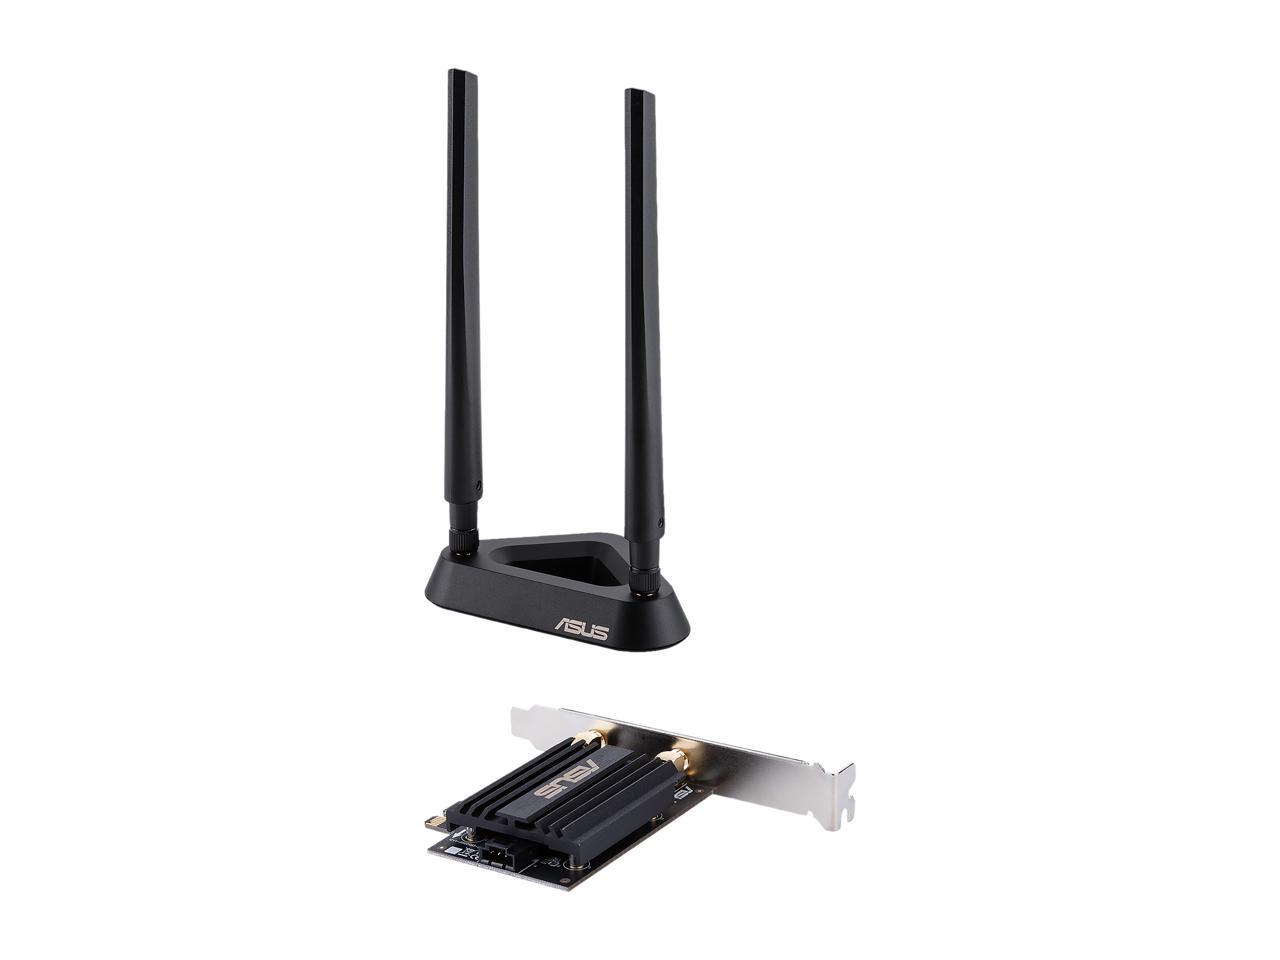 ASUS AX3000 (PCE-AX58BT) Next-Gen WiFi 6 Dual Band PCIe Wireless Adapter with Bluetooth 5.0 - OFDMA, 2x2 MU-MIMO and WPA3 Security - image 3 of 11